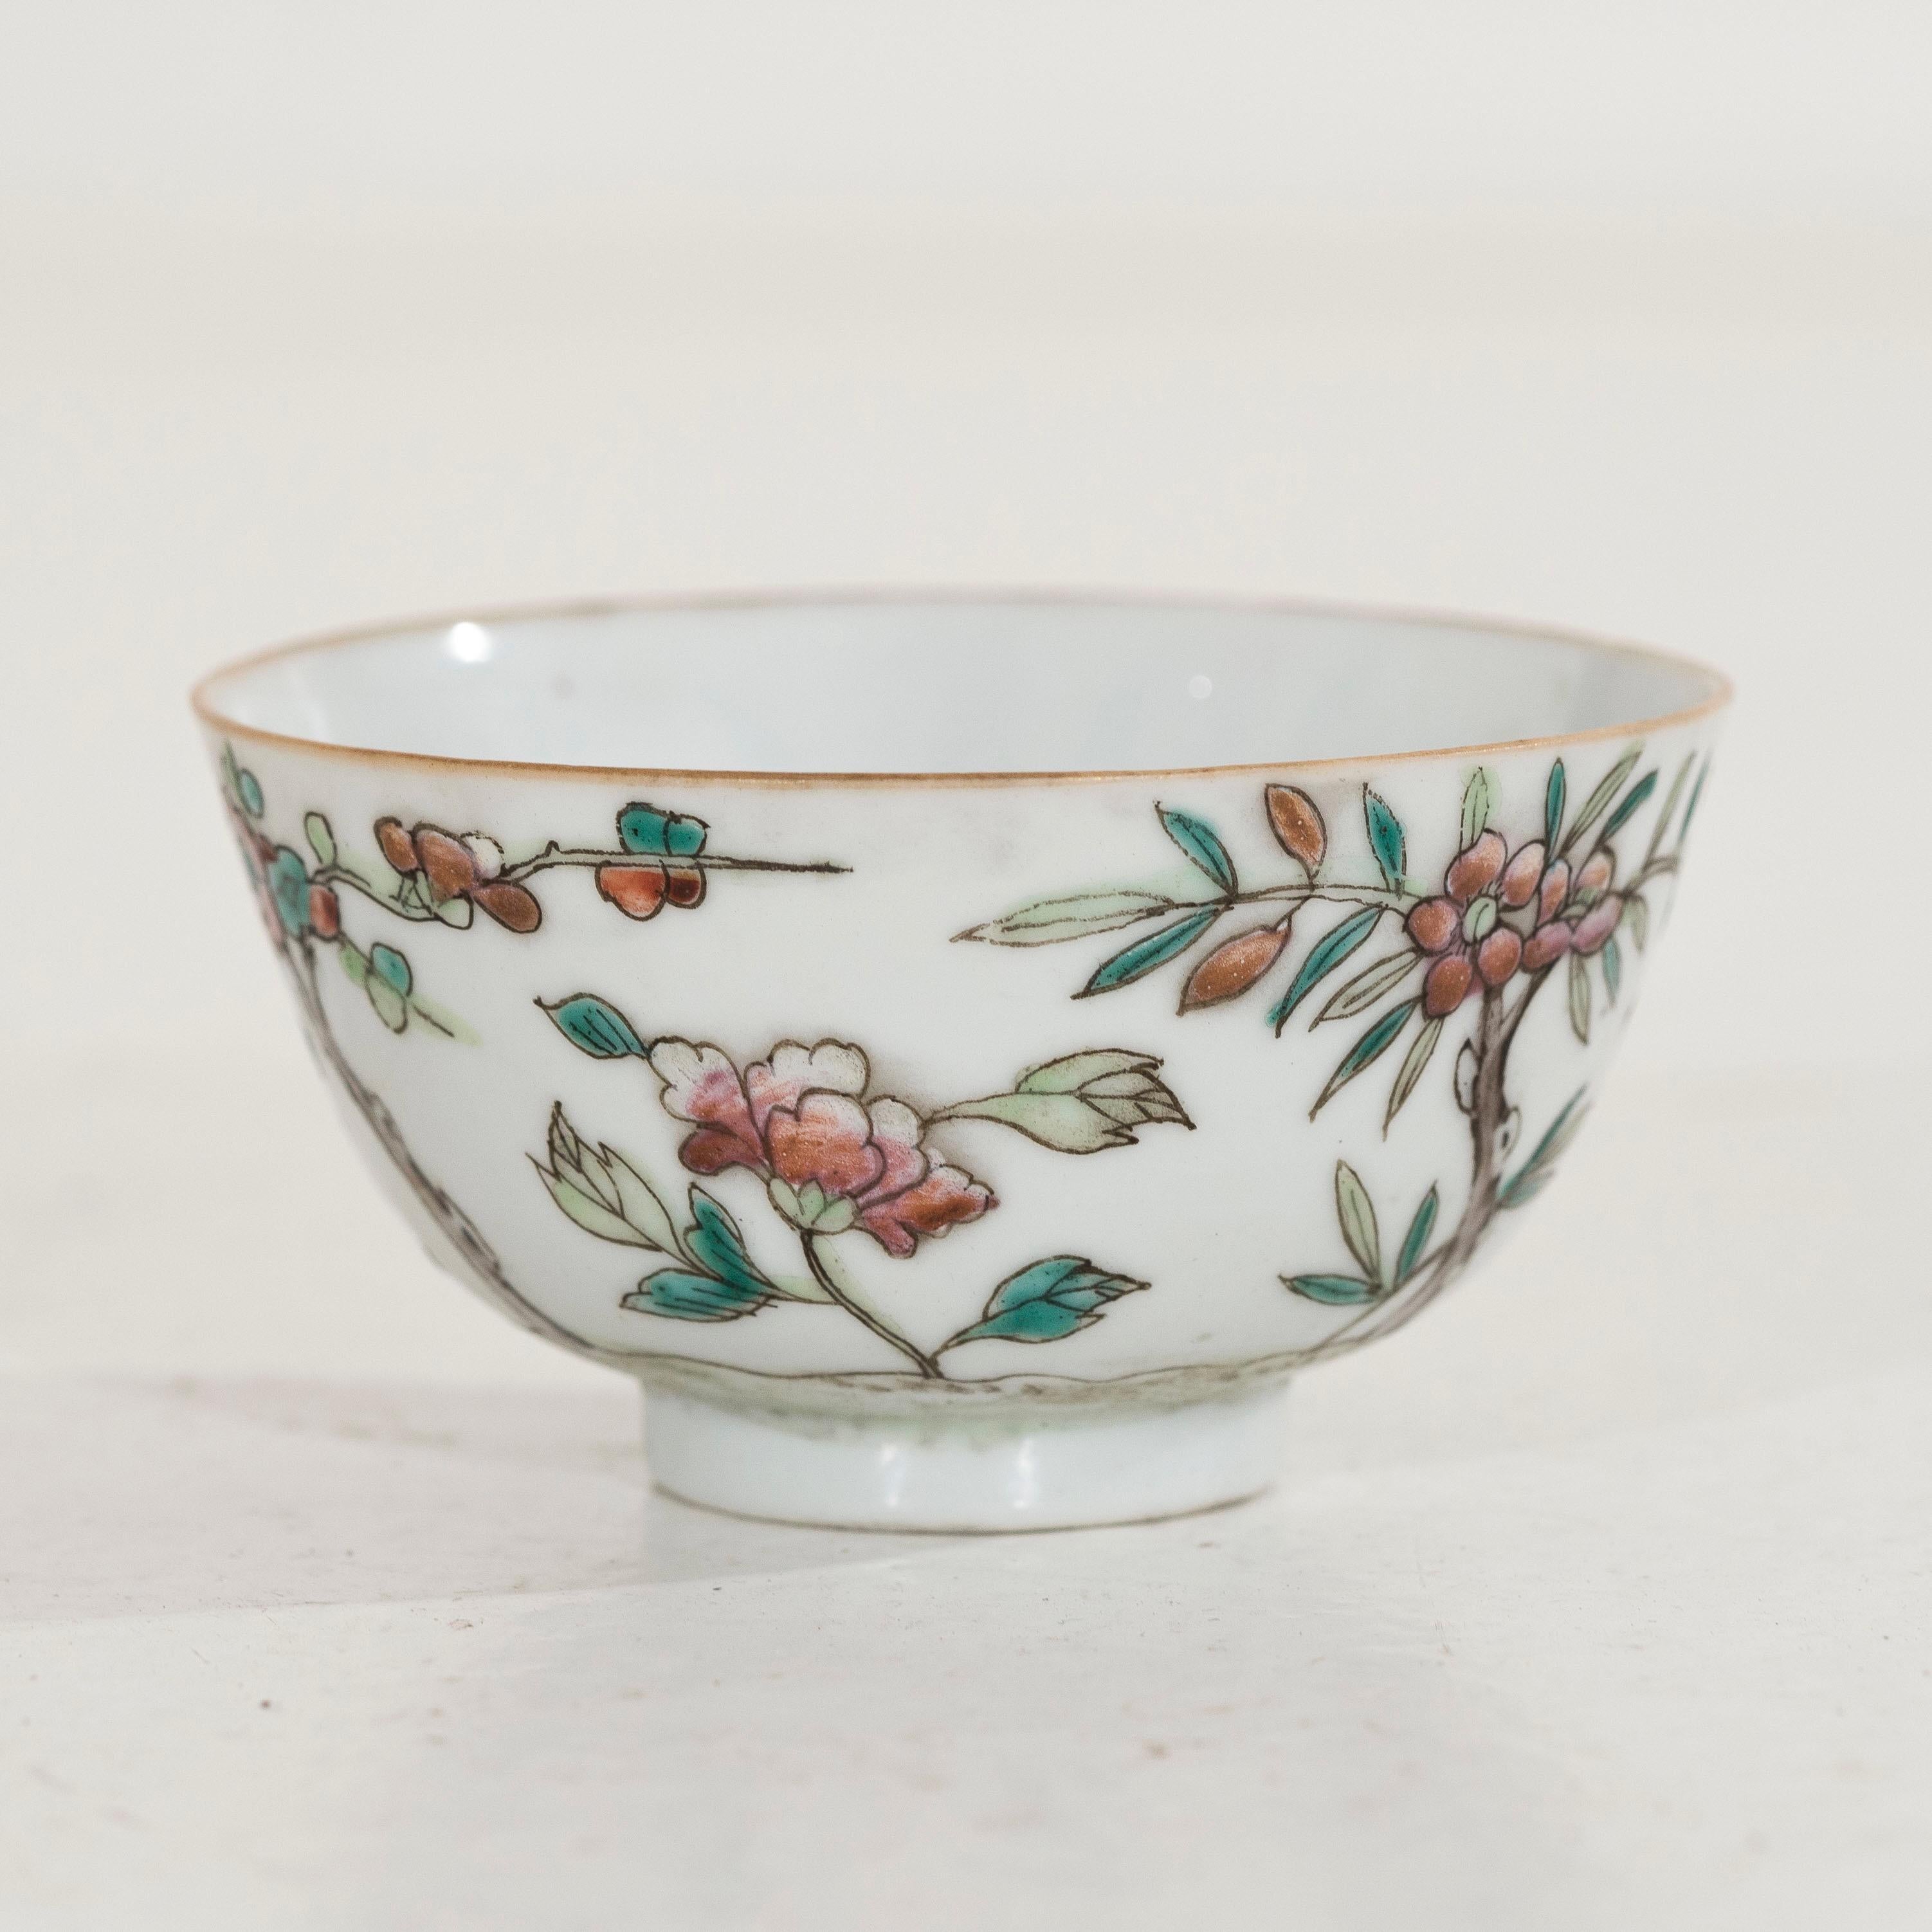 Rare Chinese bowl with painted decorations, 18th Century.